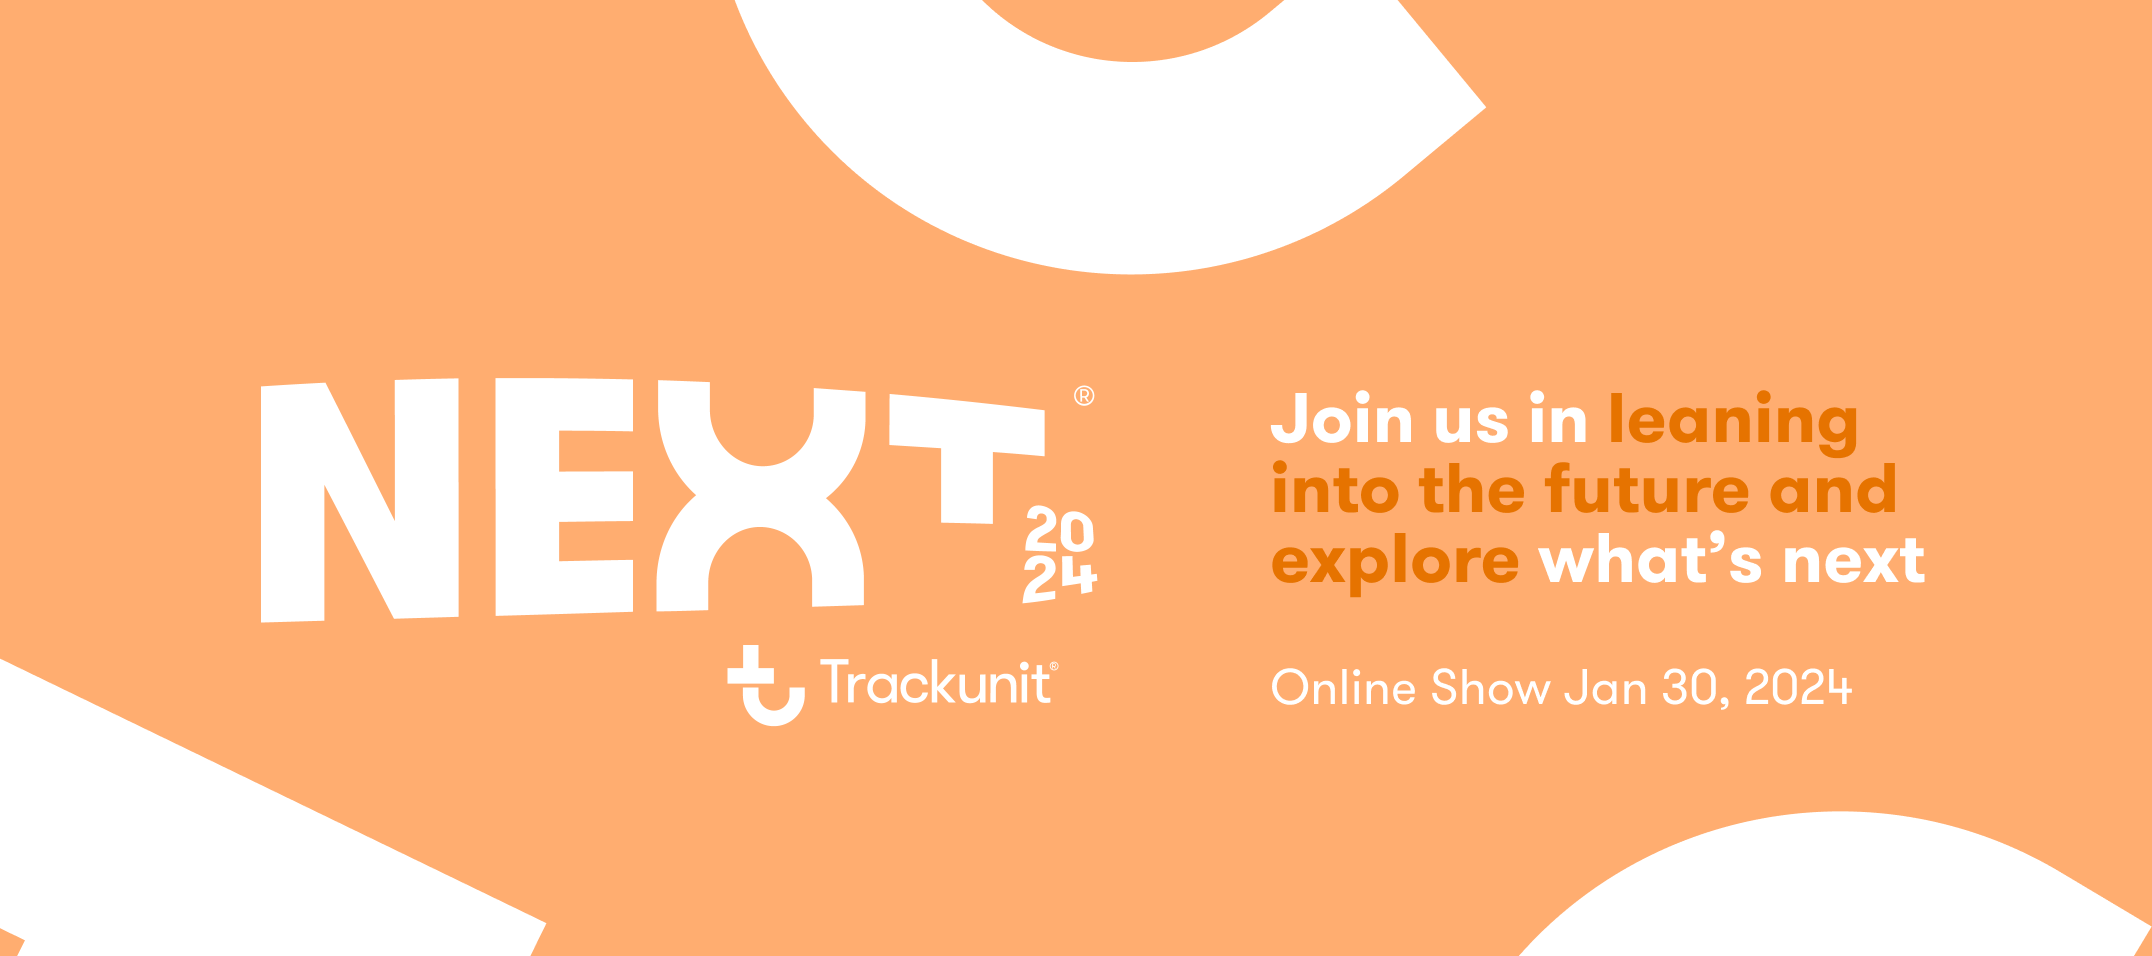 What are you most excited about in Trackunit Next?